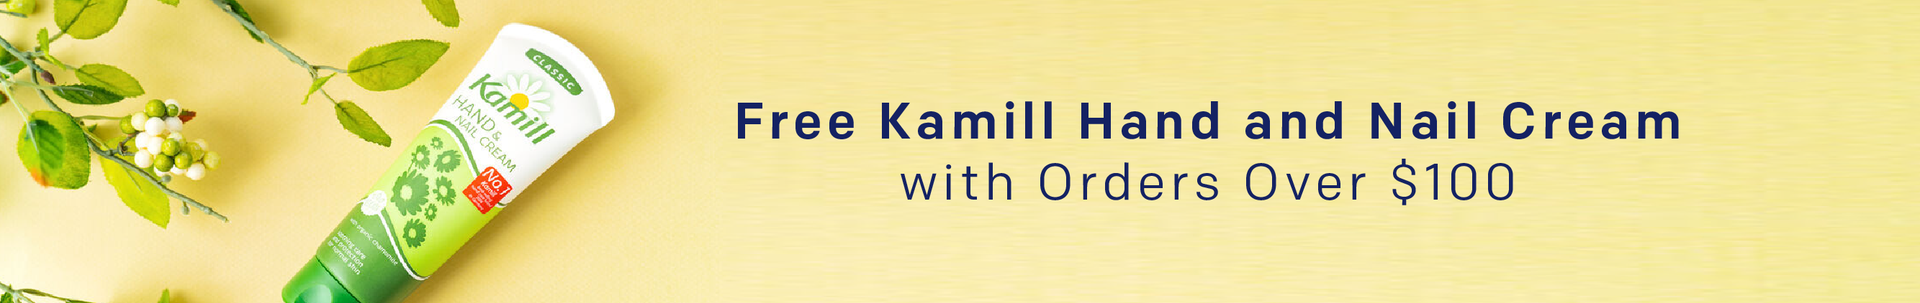 Free Kamill Hand and Nail Cream with Orders Over $100